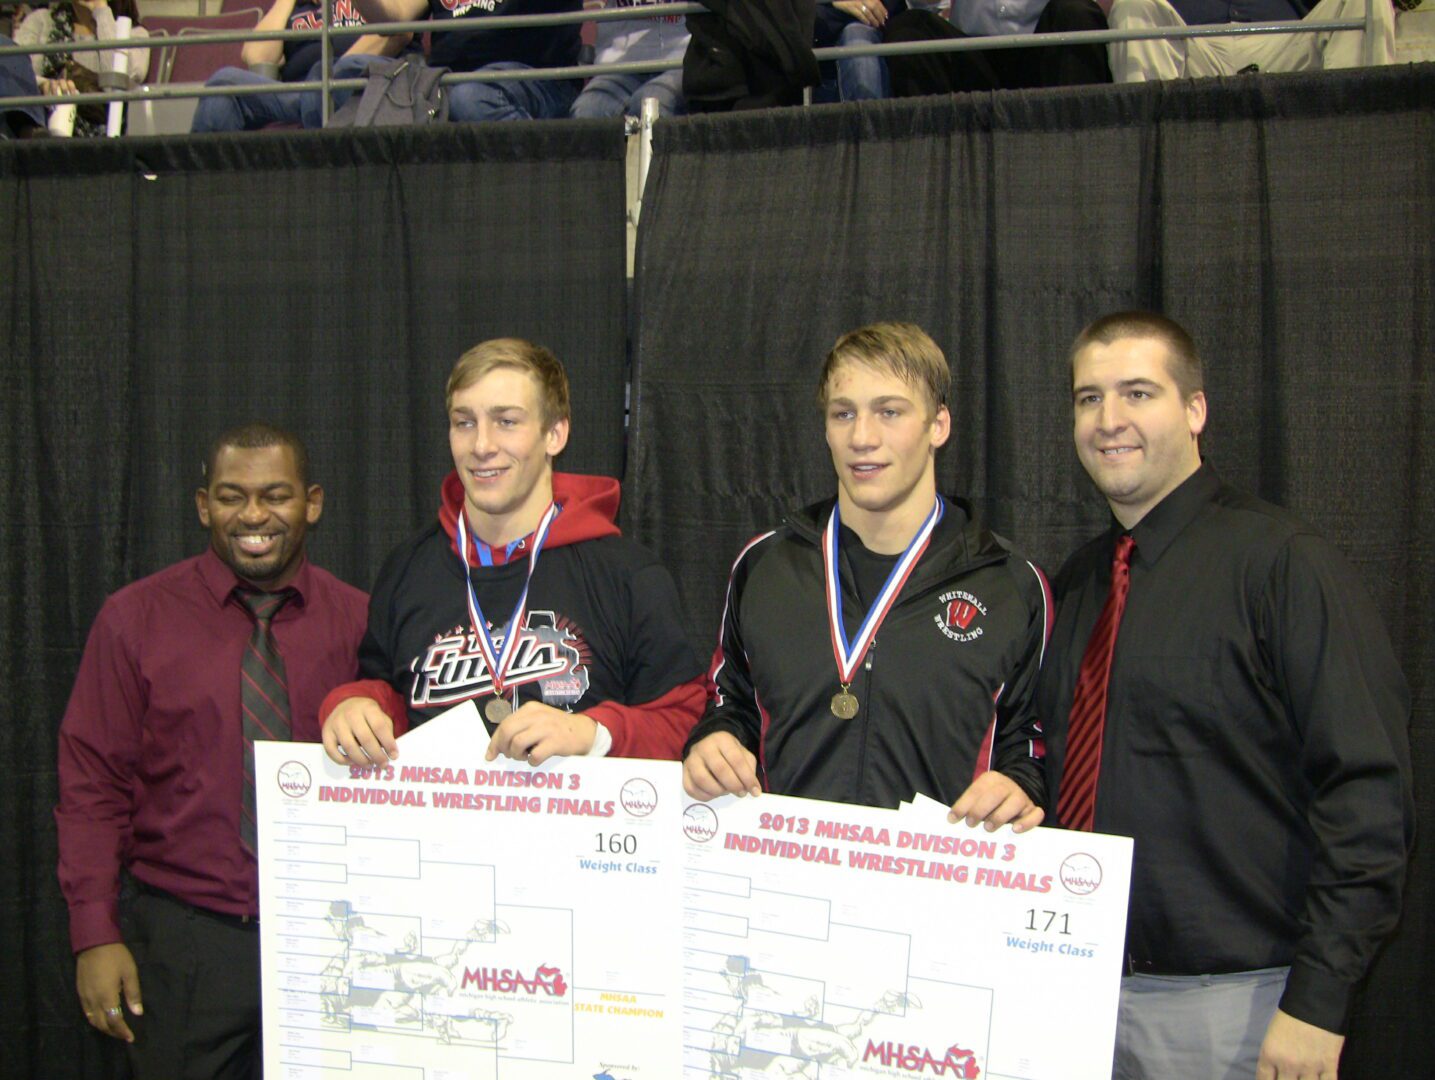 Steven and Joe Sika win state wrestling titles (Video)